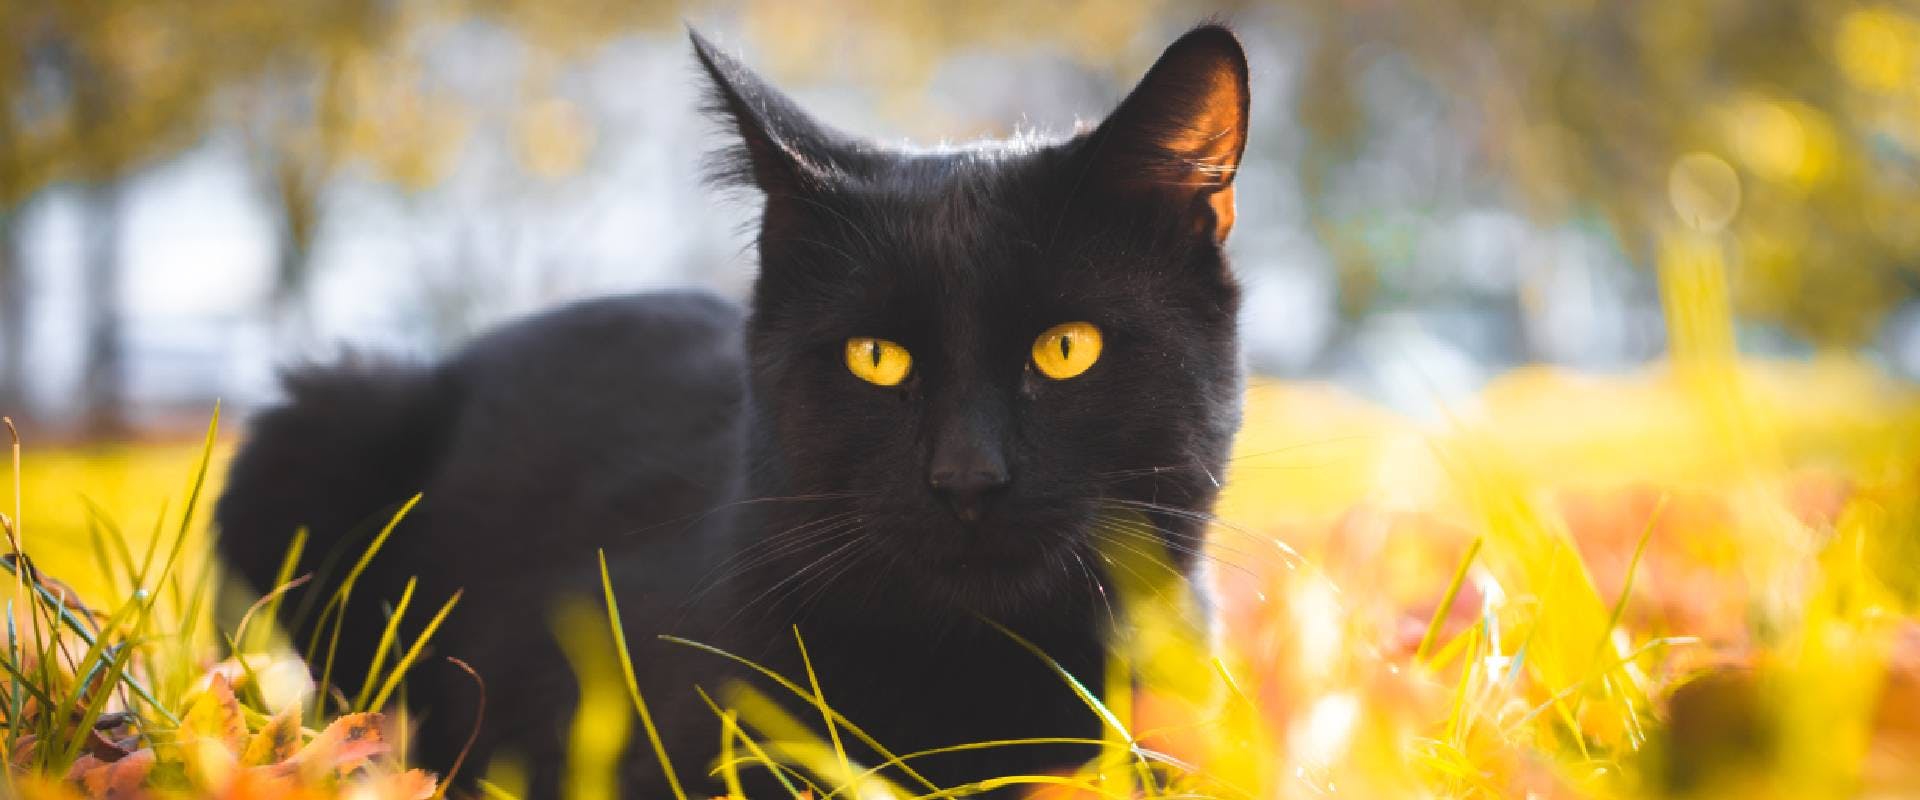 Black cat with yellow eyes outside